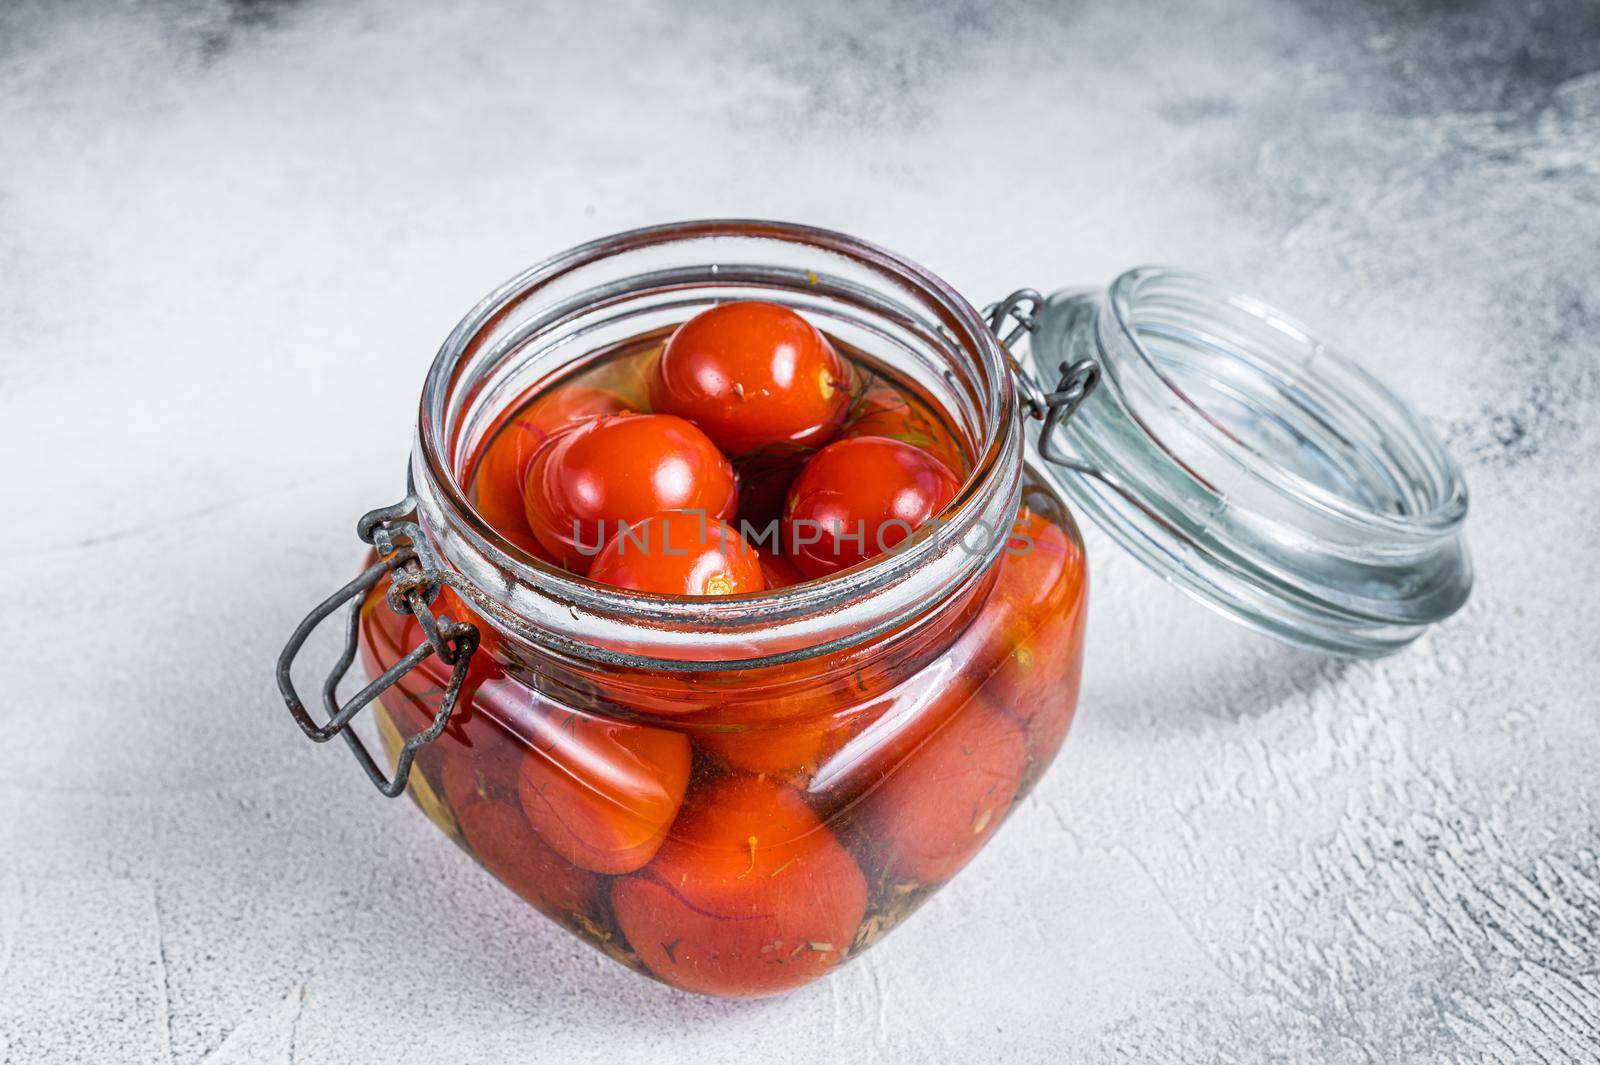 Pickled cherry tomatoes in a glass jar. White background. Top view by Composter